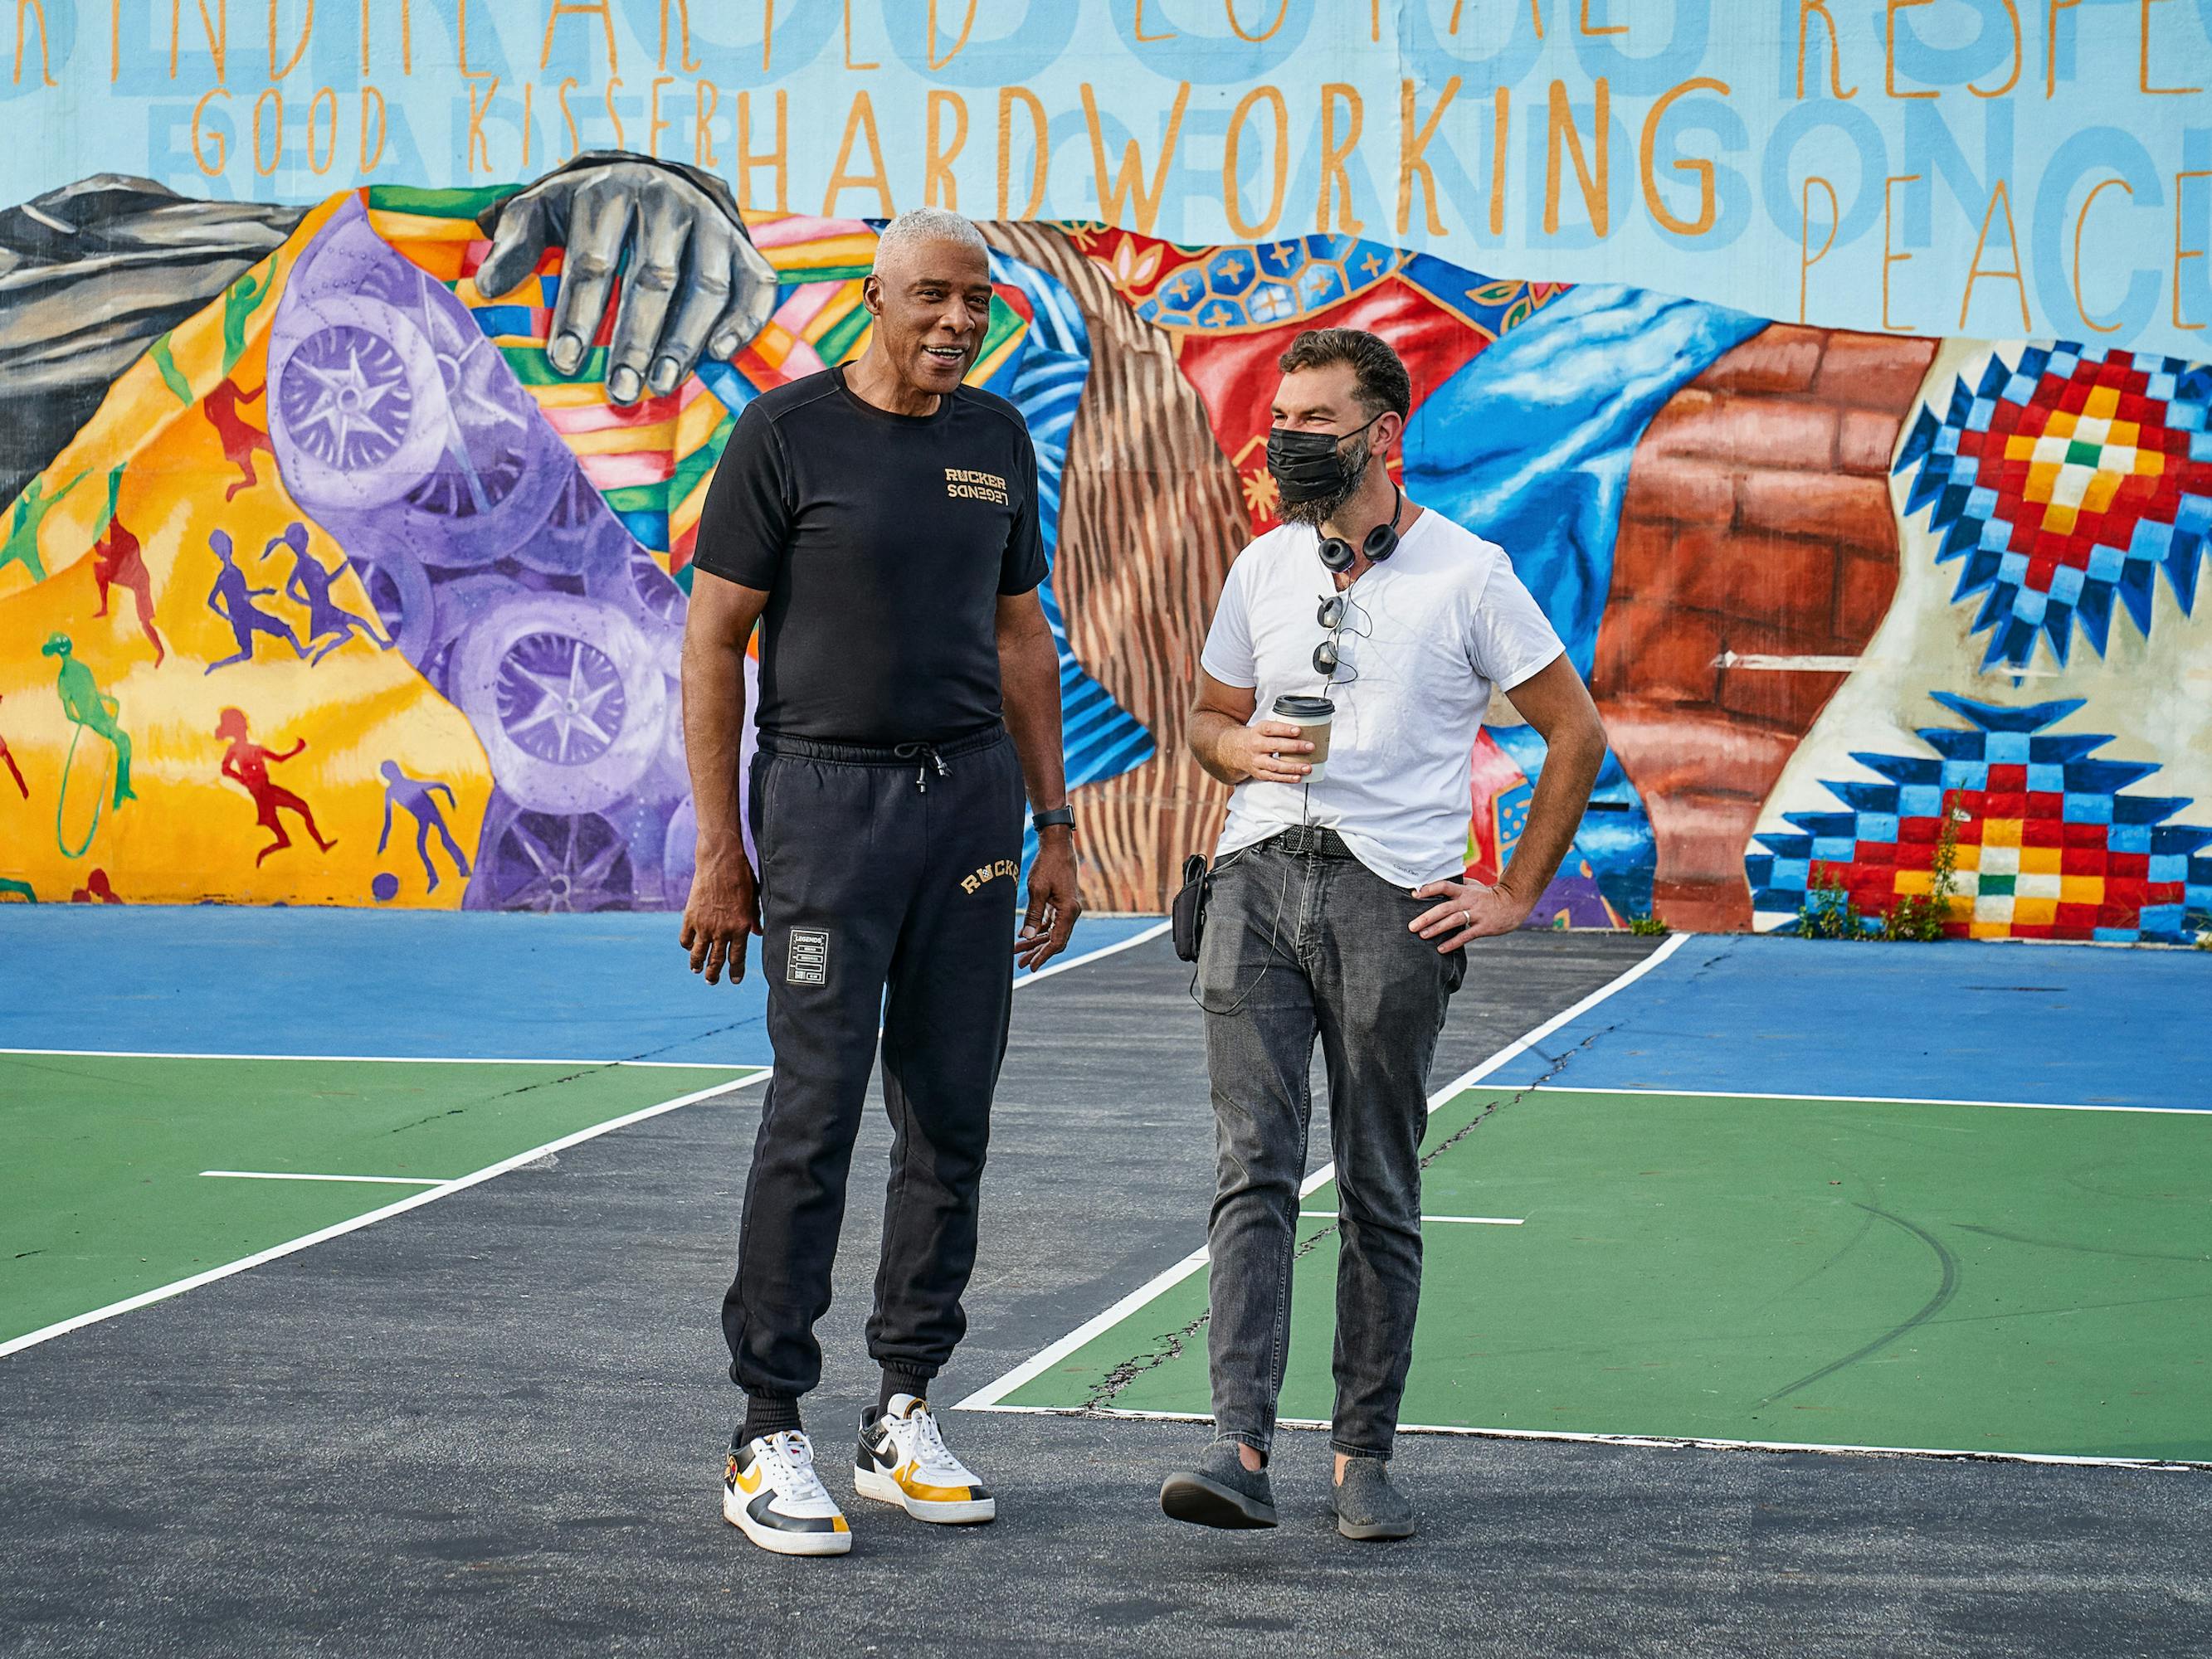 Dr. J (Julius Erving) and Jeremiah Zagar stand on an outdoor basketball court against a colorful mural.